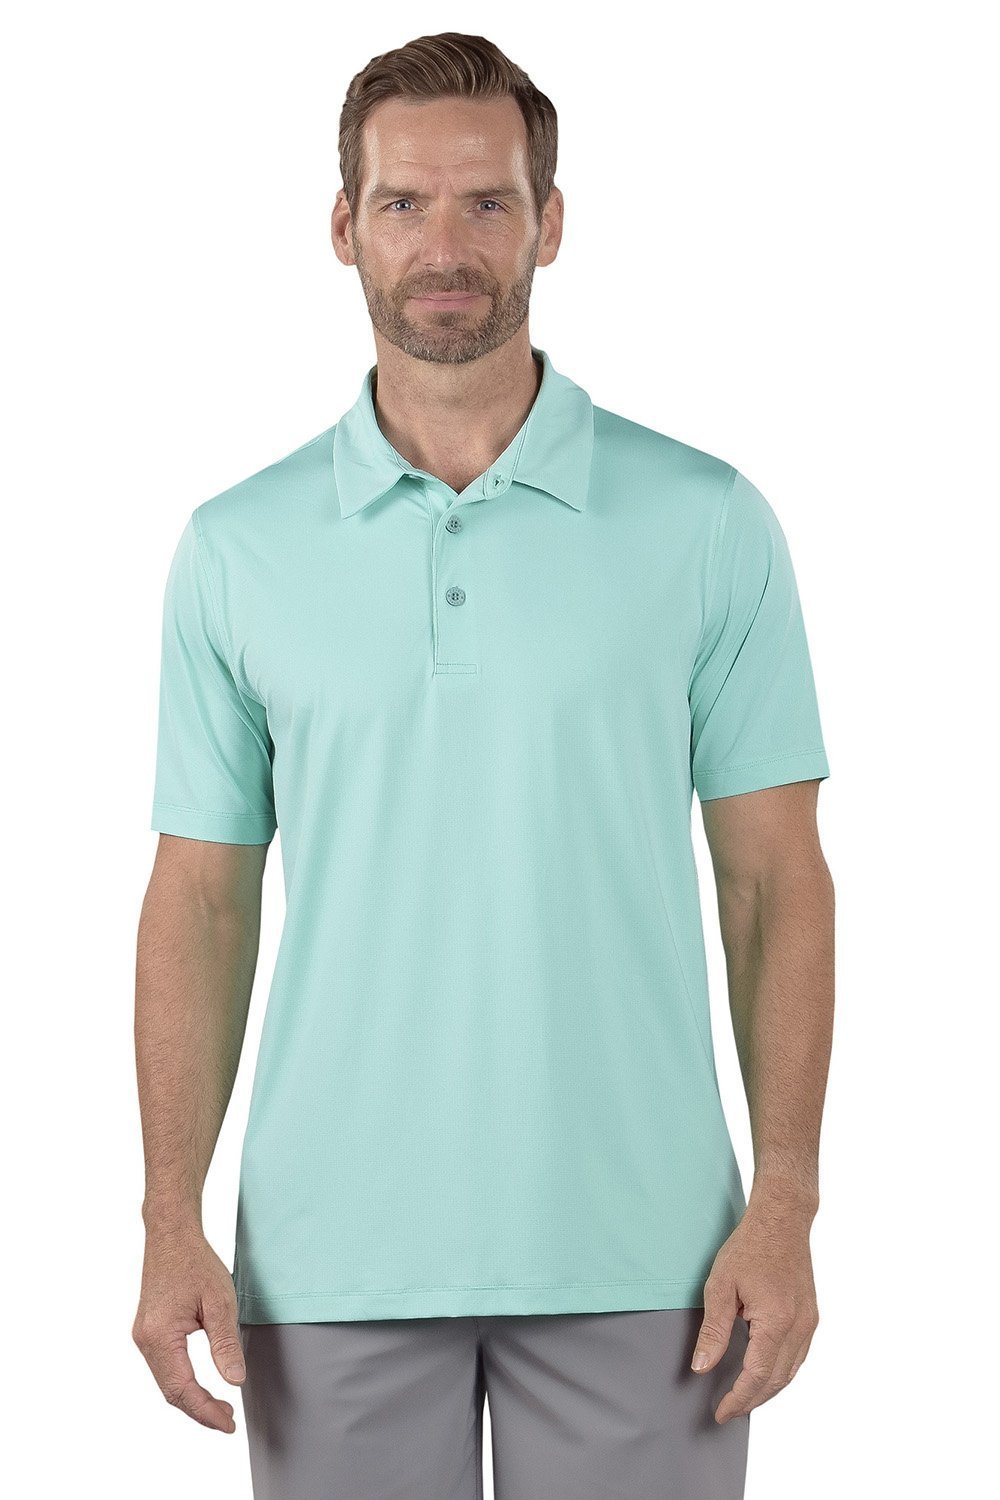 Stone Oasis Polo by Covel